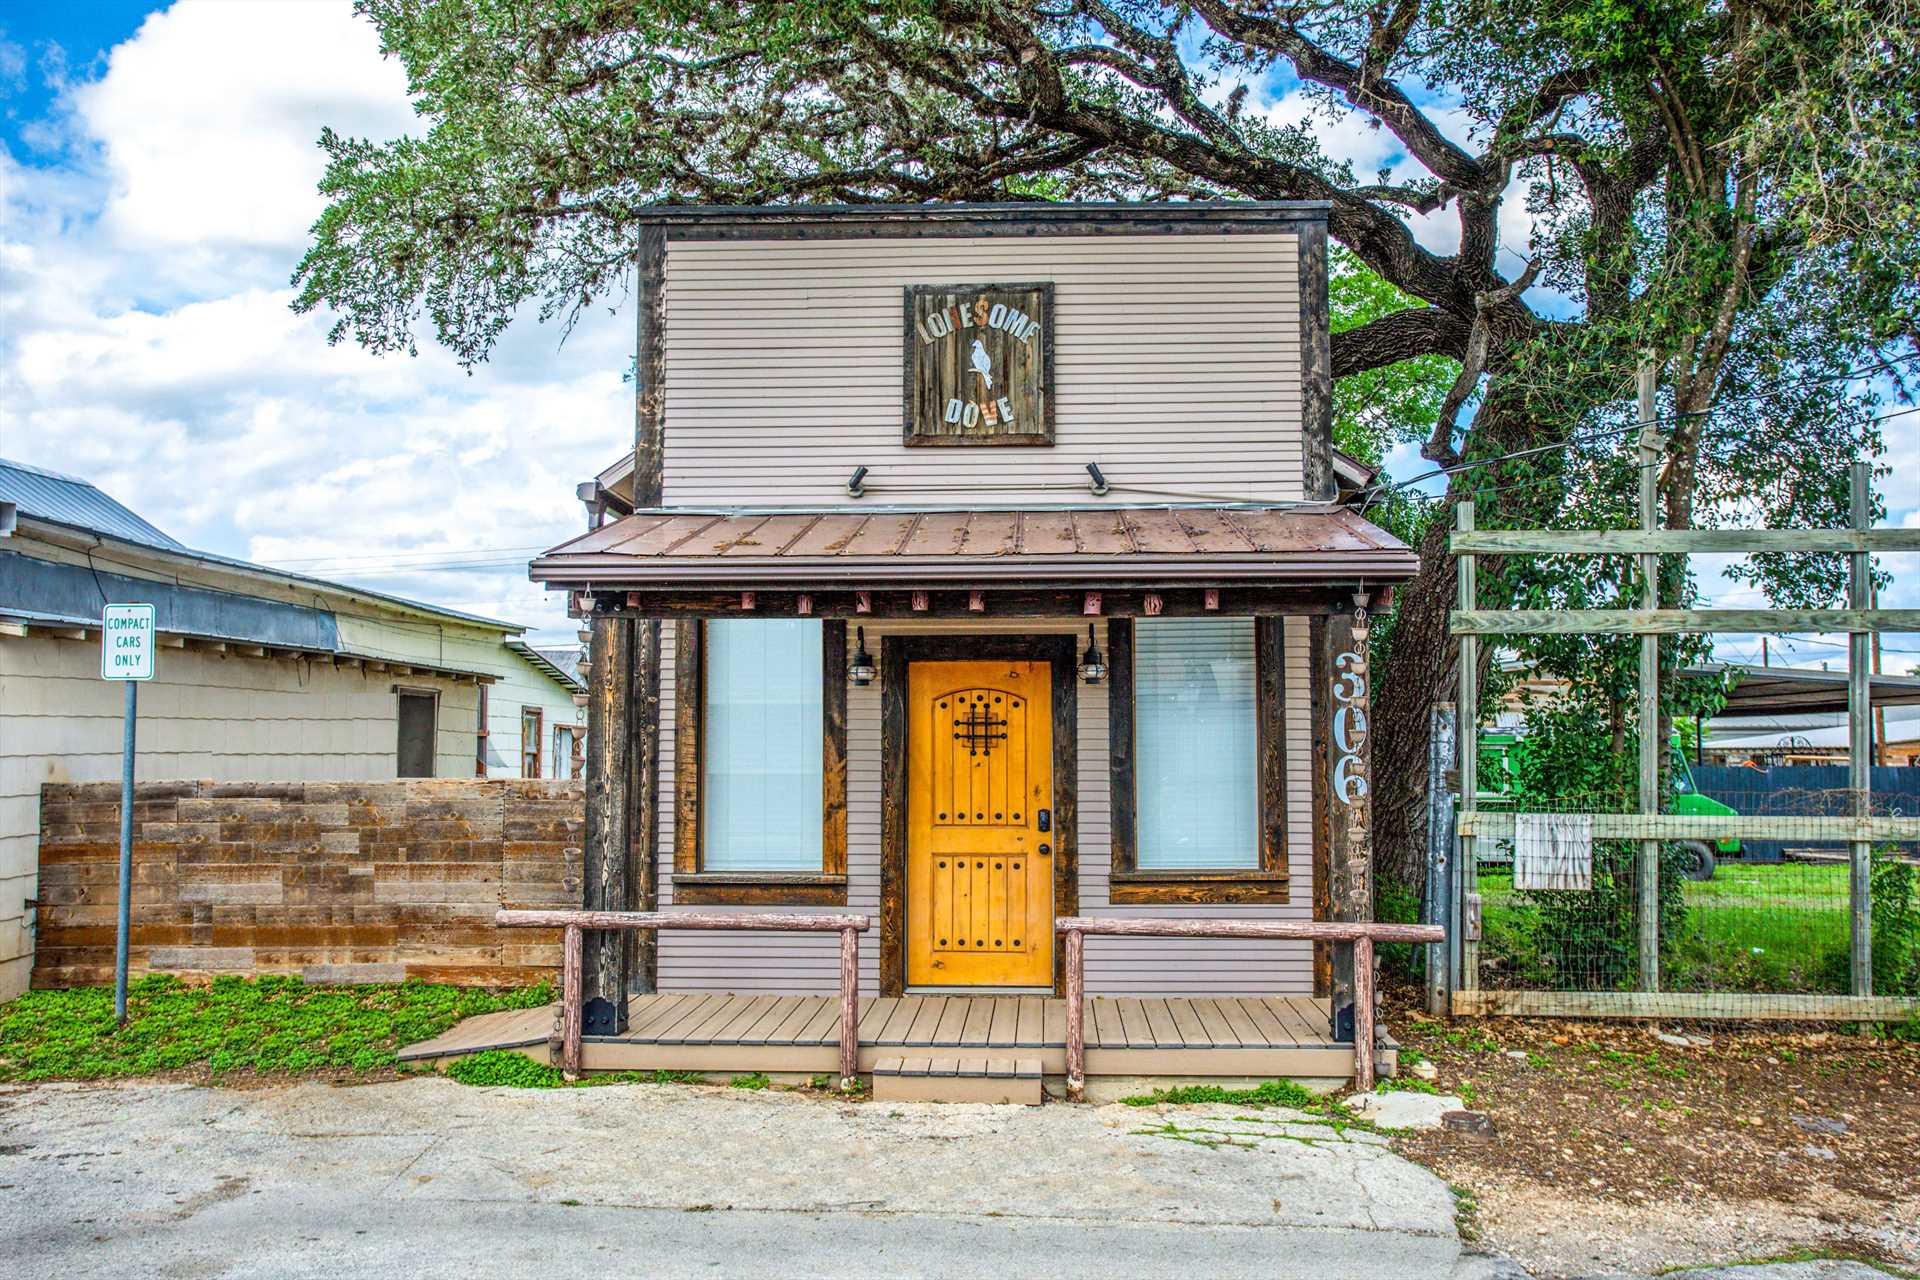                                                 Complete with hitchin' posts, Lonesome Dove is your getaway and gateway to everything Bandera has to offer!